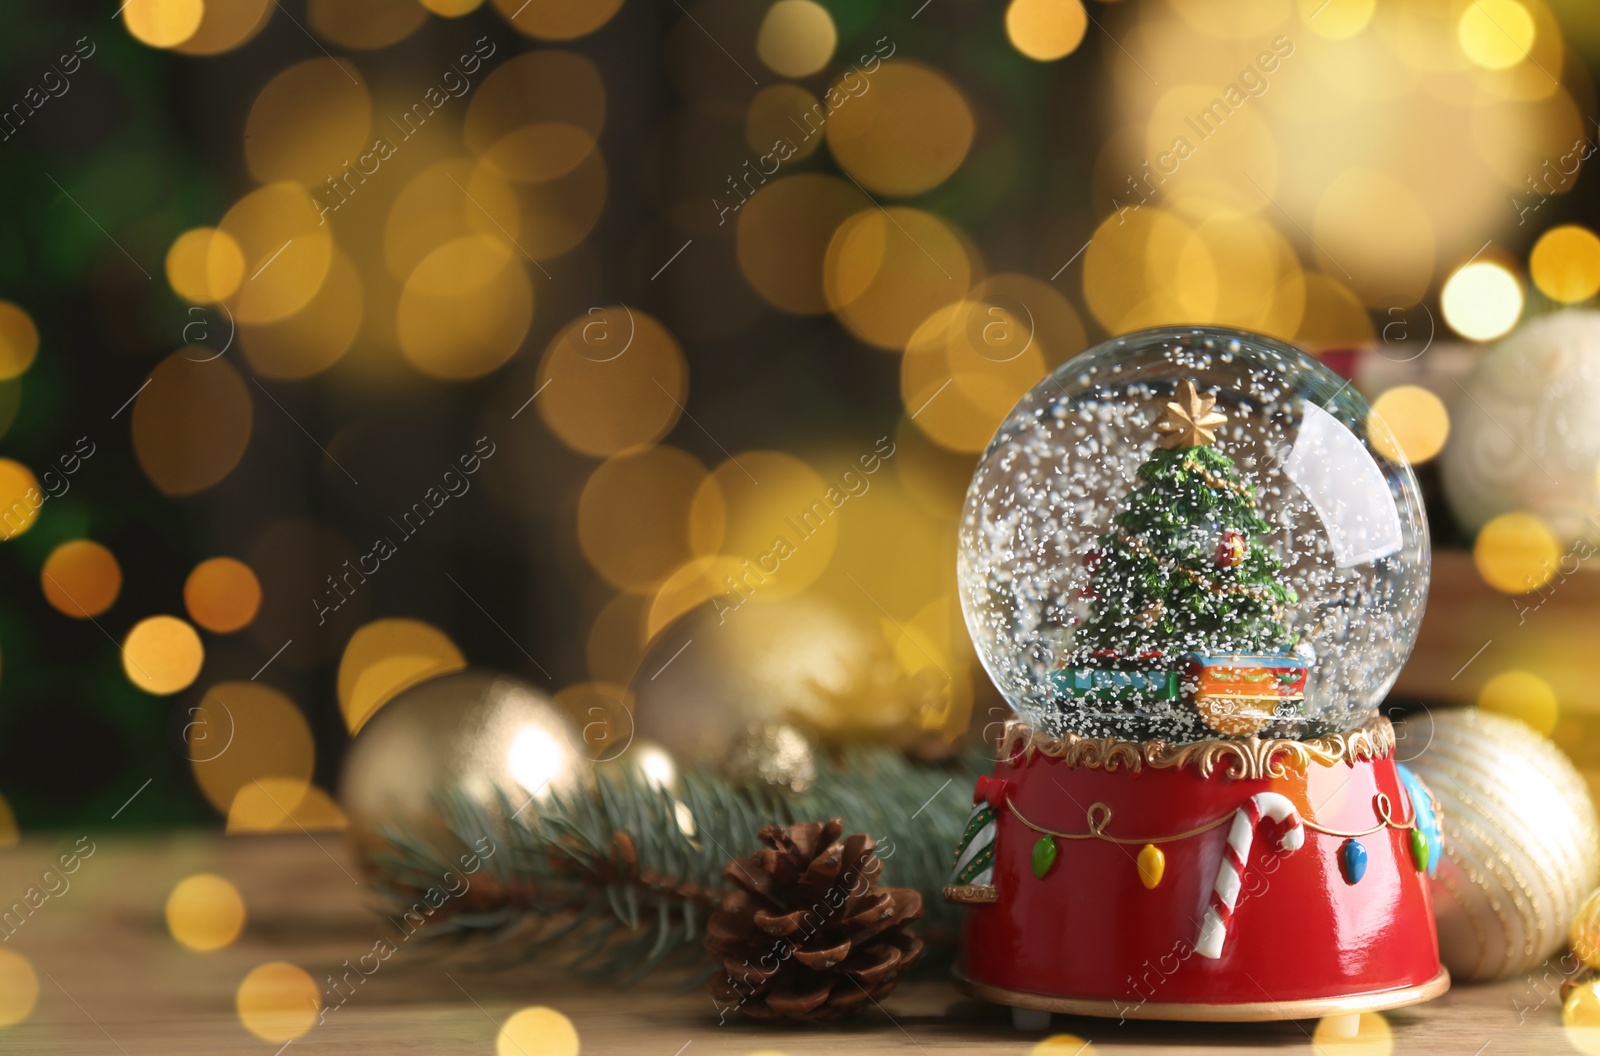 Image of Beautiful snow globe and Christmas decor on wooden table against blurred festive lights, space for text. Bokeh effect